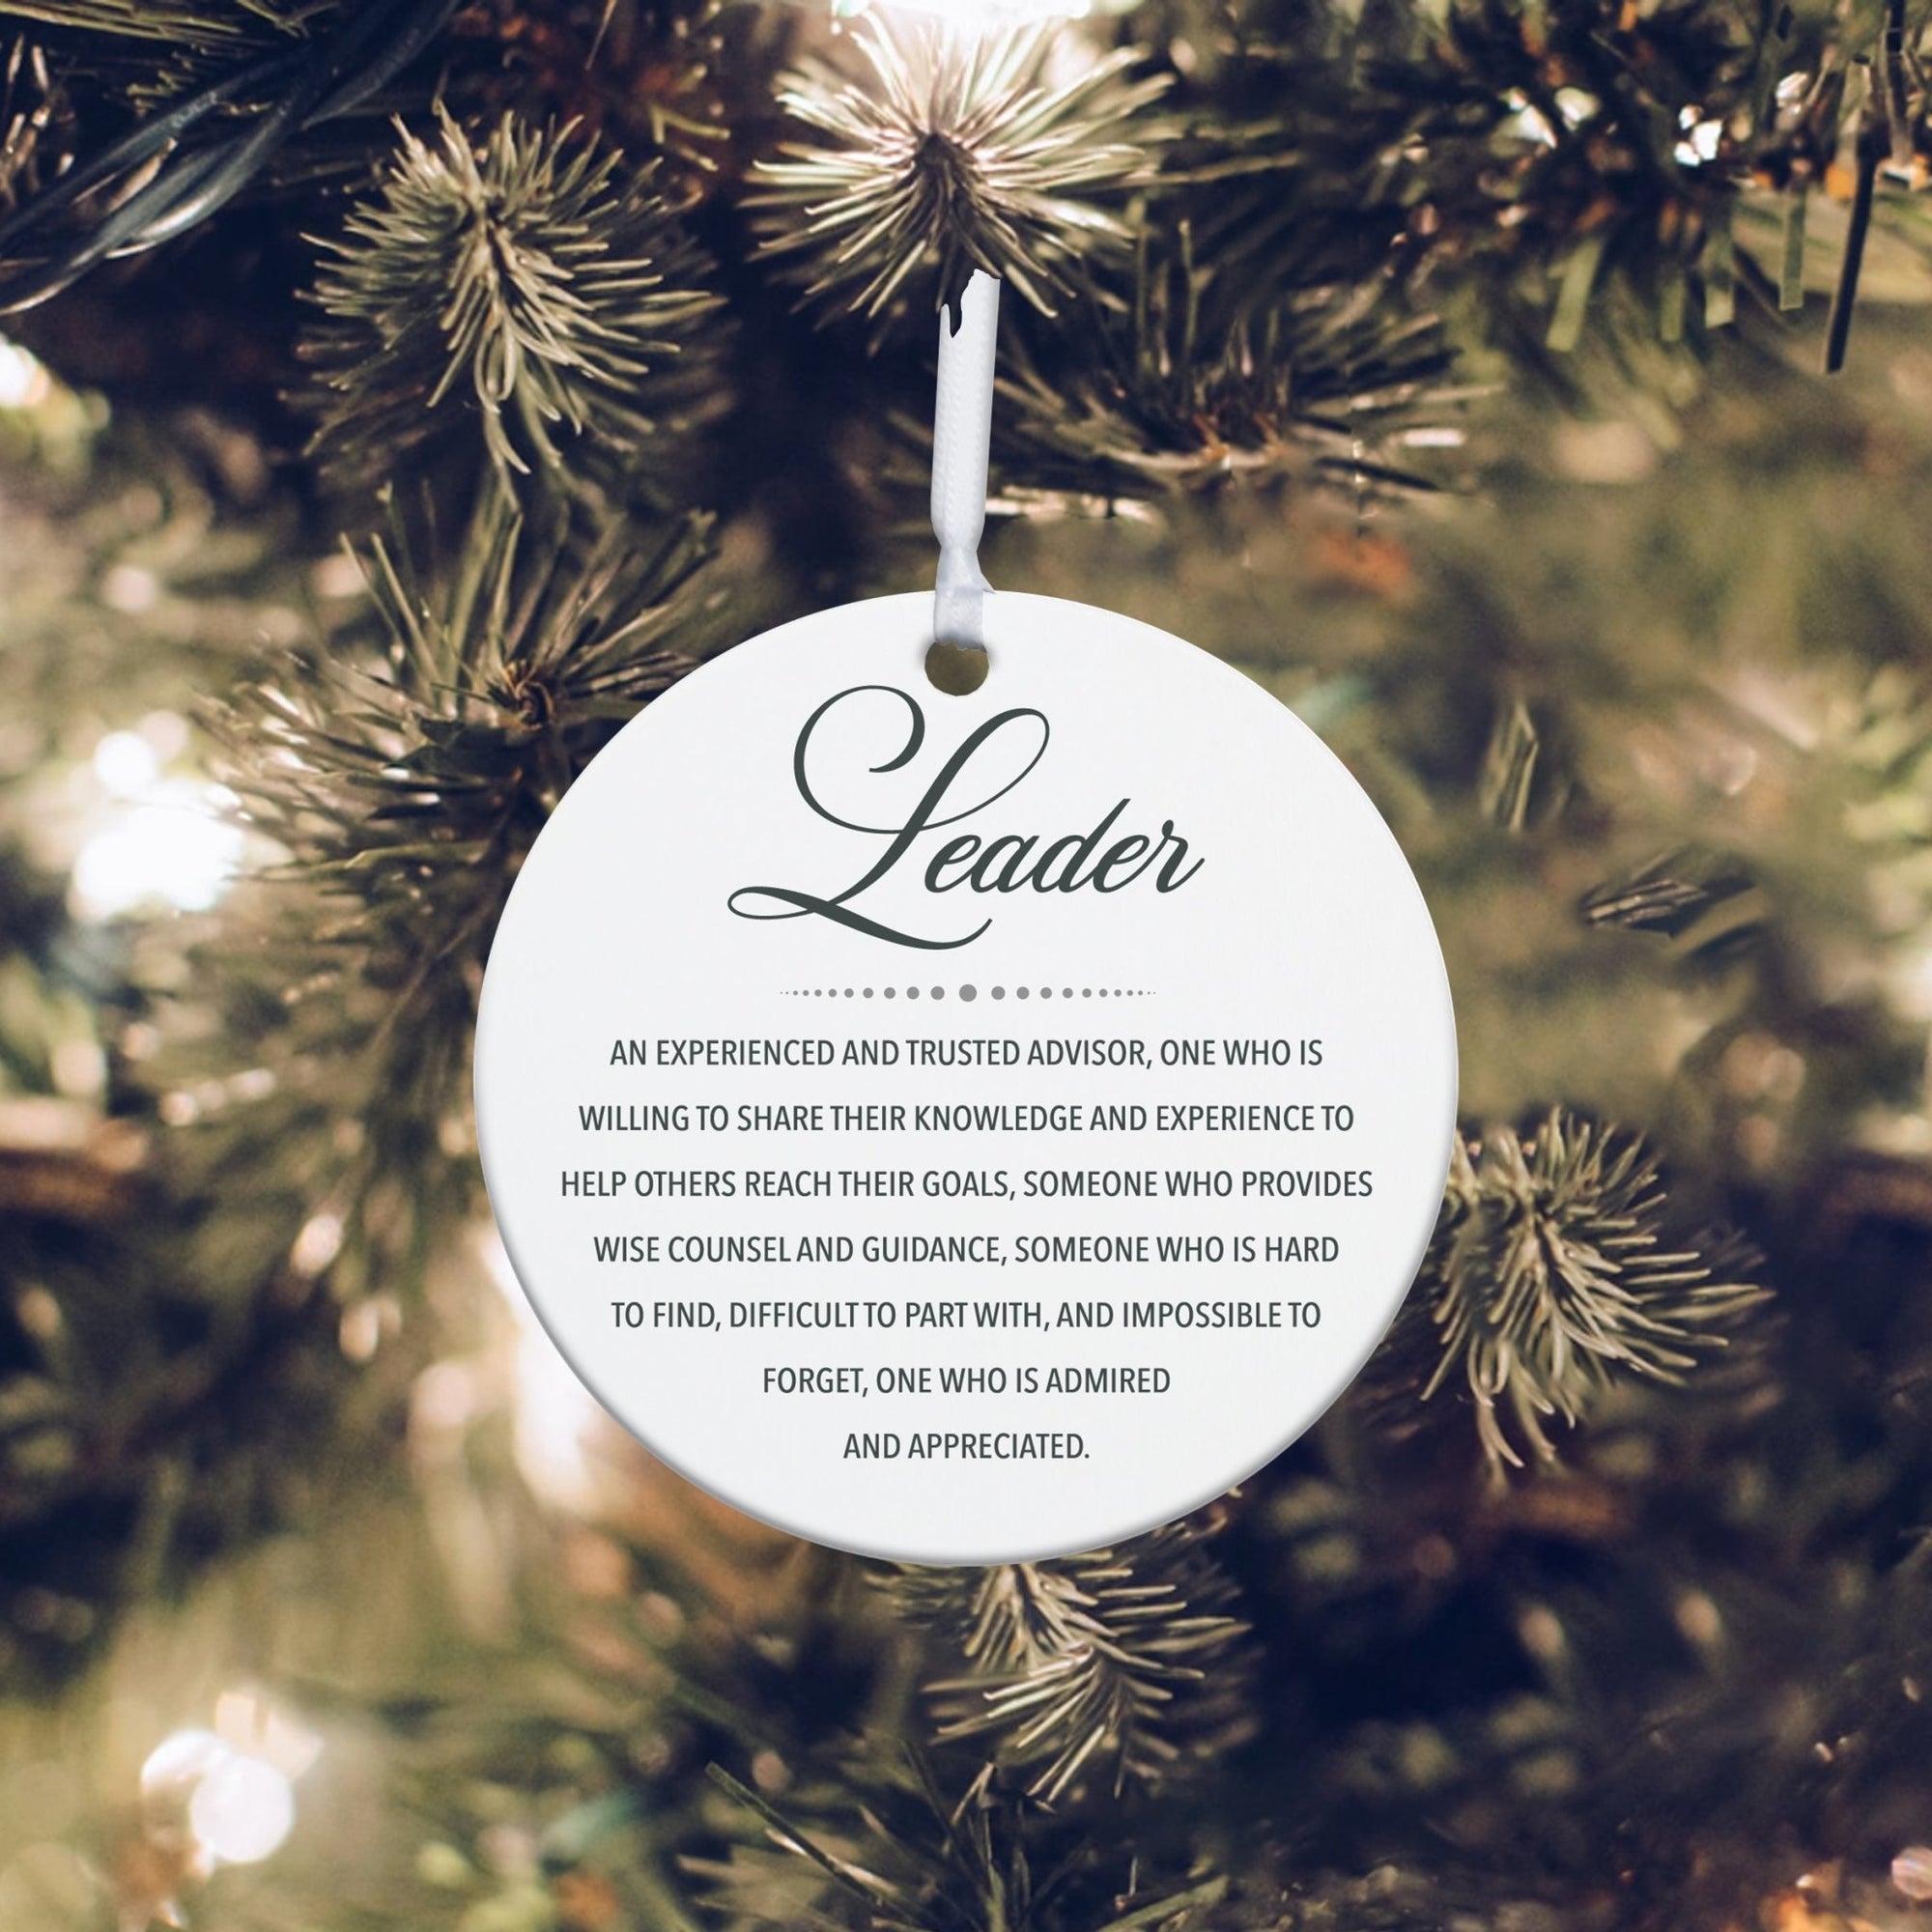 Boss / Leader White Ornament With Inspirational Message Gift Ideas - Leader (n.) - LifeSong Milestones